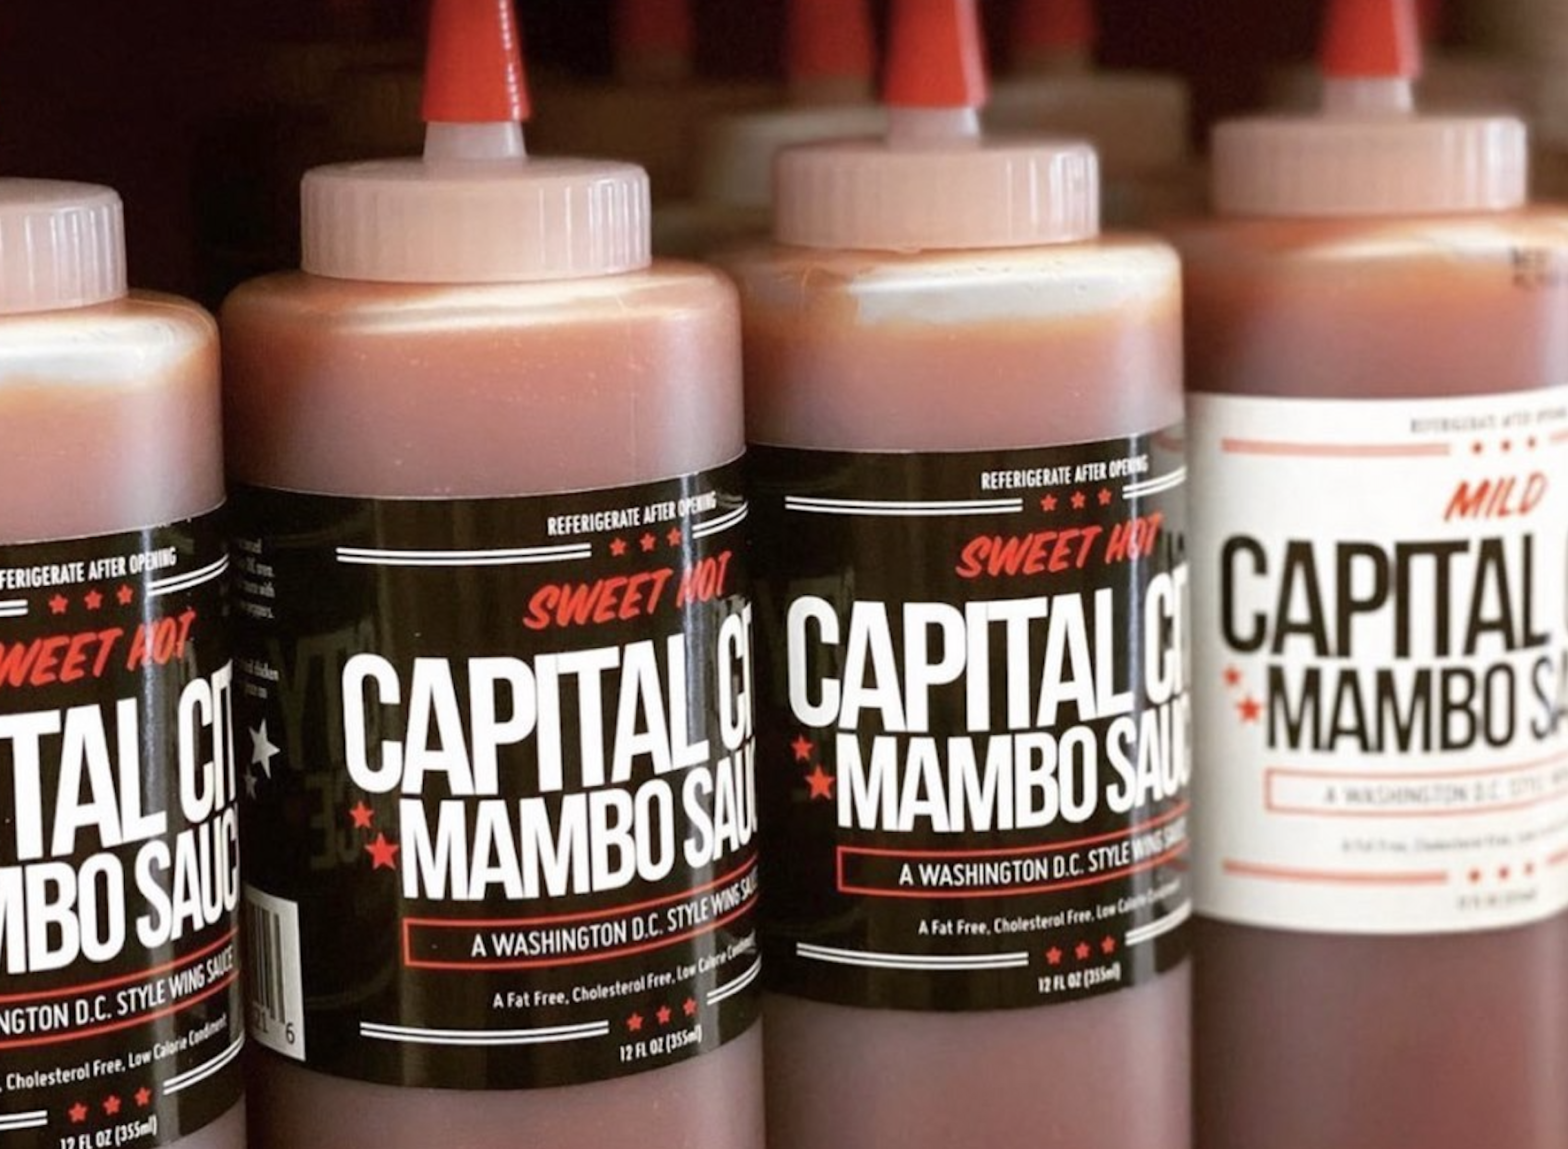 Black-Owned Mambo Sauce Is Coming To A City Near You After